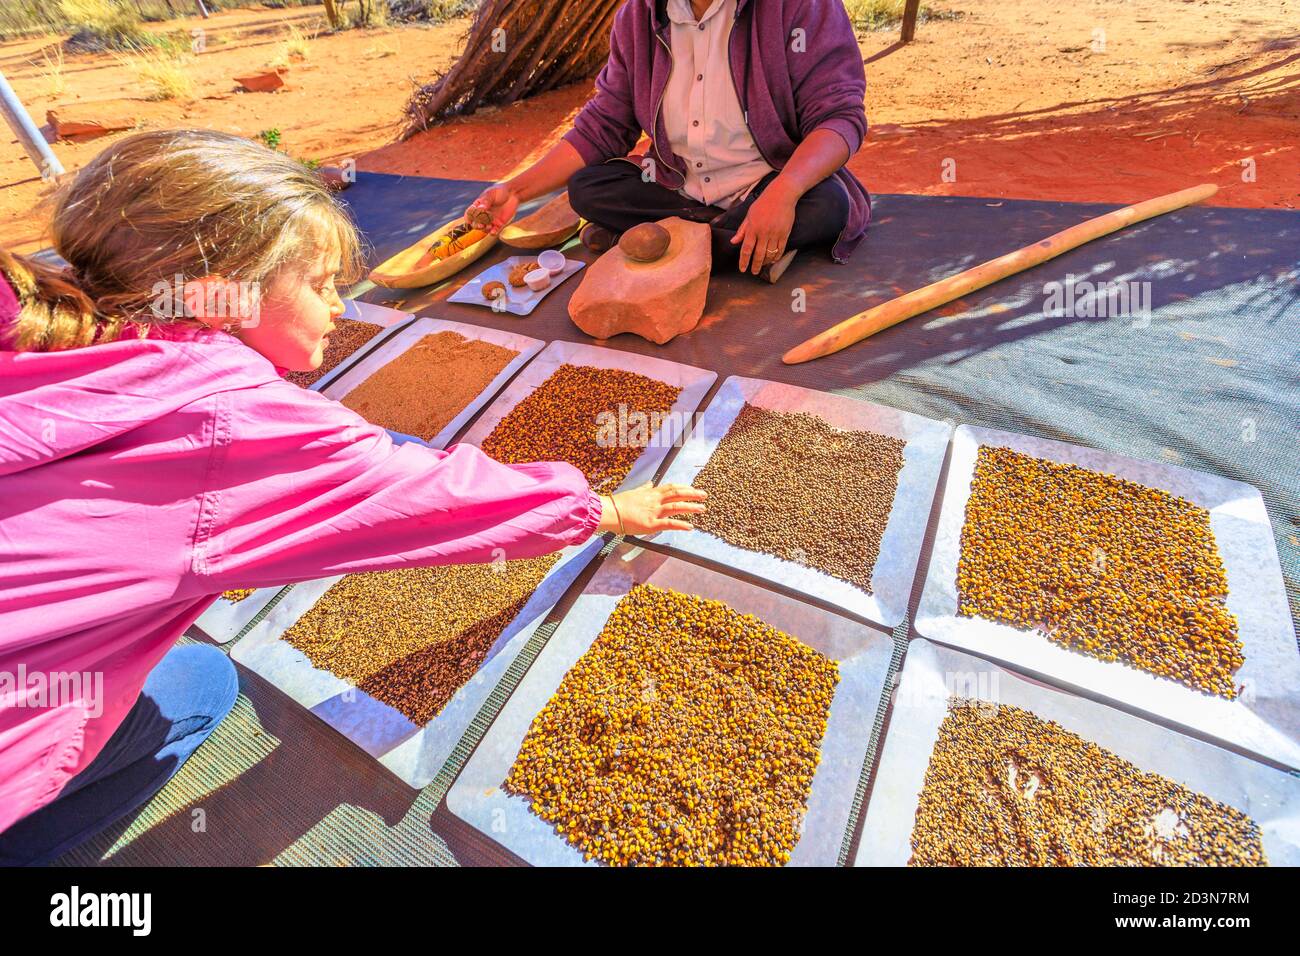 Kings Creek, Australia - Aug 21, 2019: tourists experiencing the culture of Australian Aboriginal people showing the traditional bush seeds used for Stock Photo